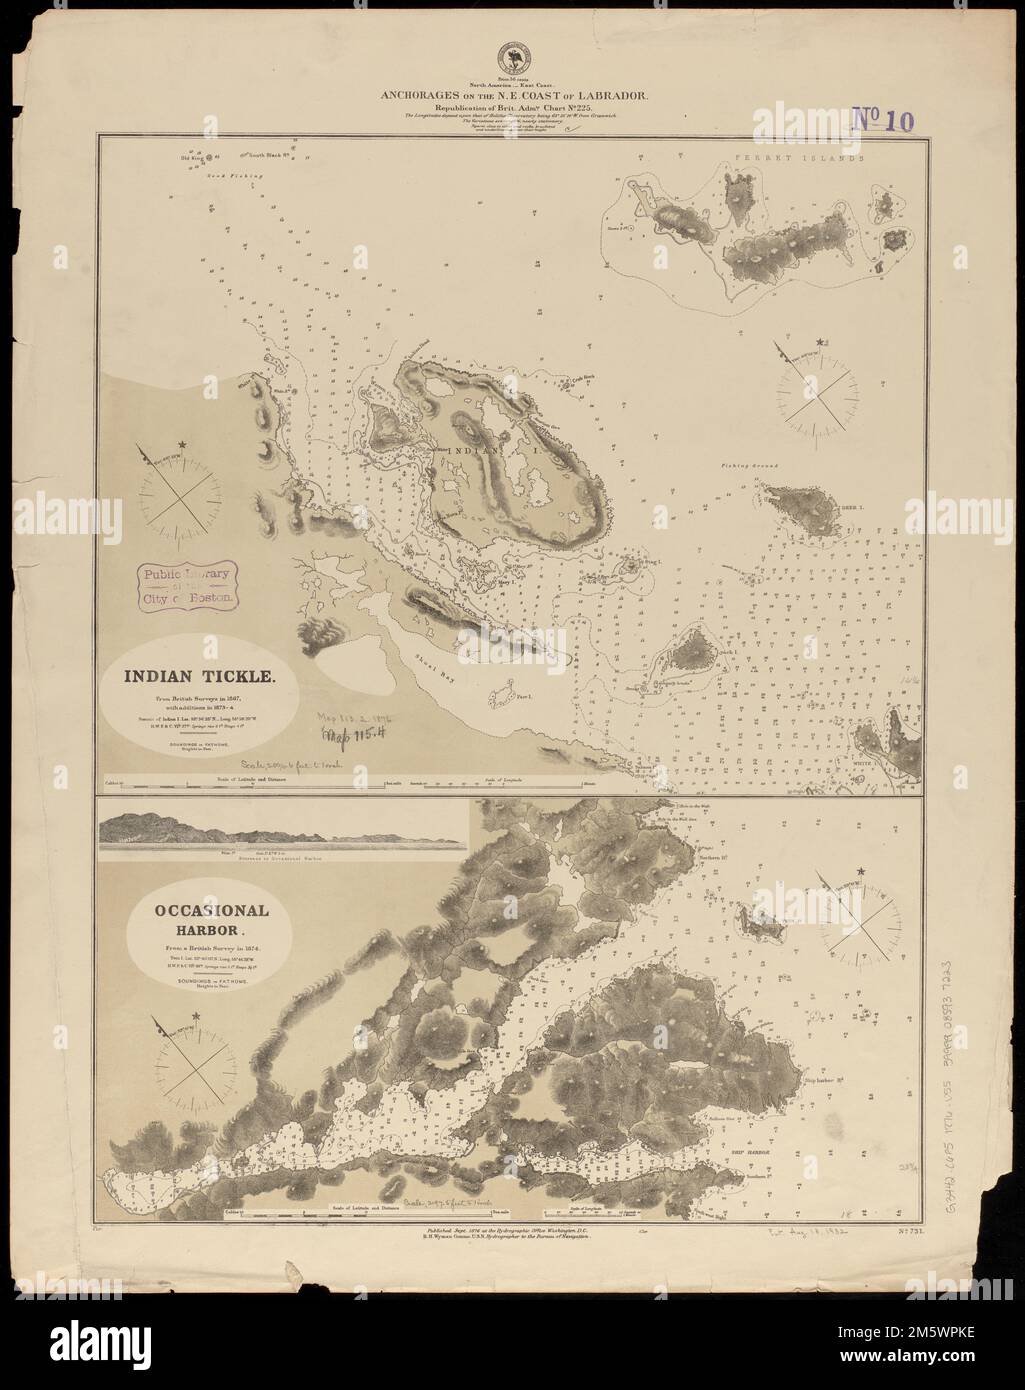 North America, east coast, anchorages on the n.e. coast of Labrador : republication of Brit. Admty. chart no. 225. Relief shown by hachures and spot heights. Depths shown soundings and form lines. Includes view of Entrance to Occasional Harbor... Indian Tickle : from British surveys in 1867, with additions in 1873-4 Occasional harbor : from a British Survey in 1874. Indian Tickle : from British surveys in 1867, with additions in 1873-4 Occasional harbor : from a British Survey in 1874, Canada  , Newfoundland and Labrador  ,province  Indian Tickle Occasional Harbour Stock Photo